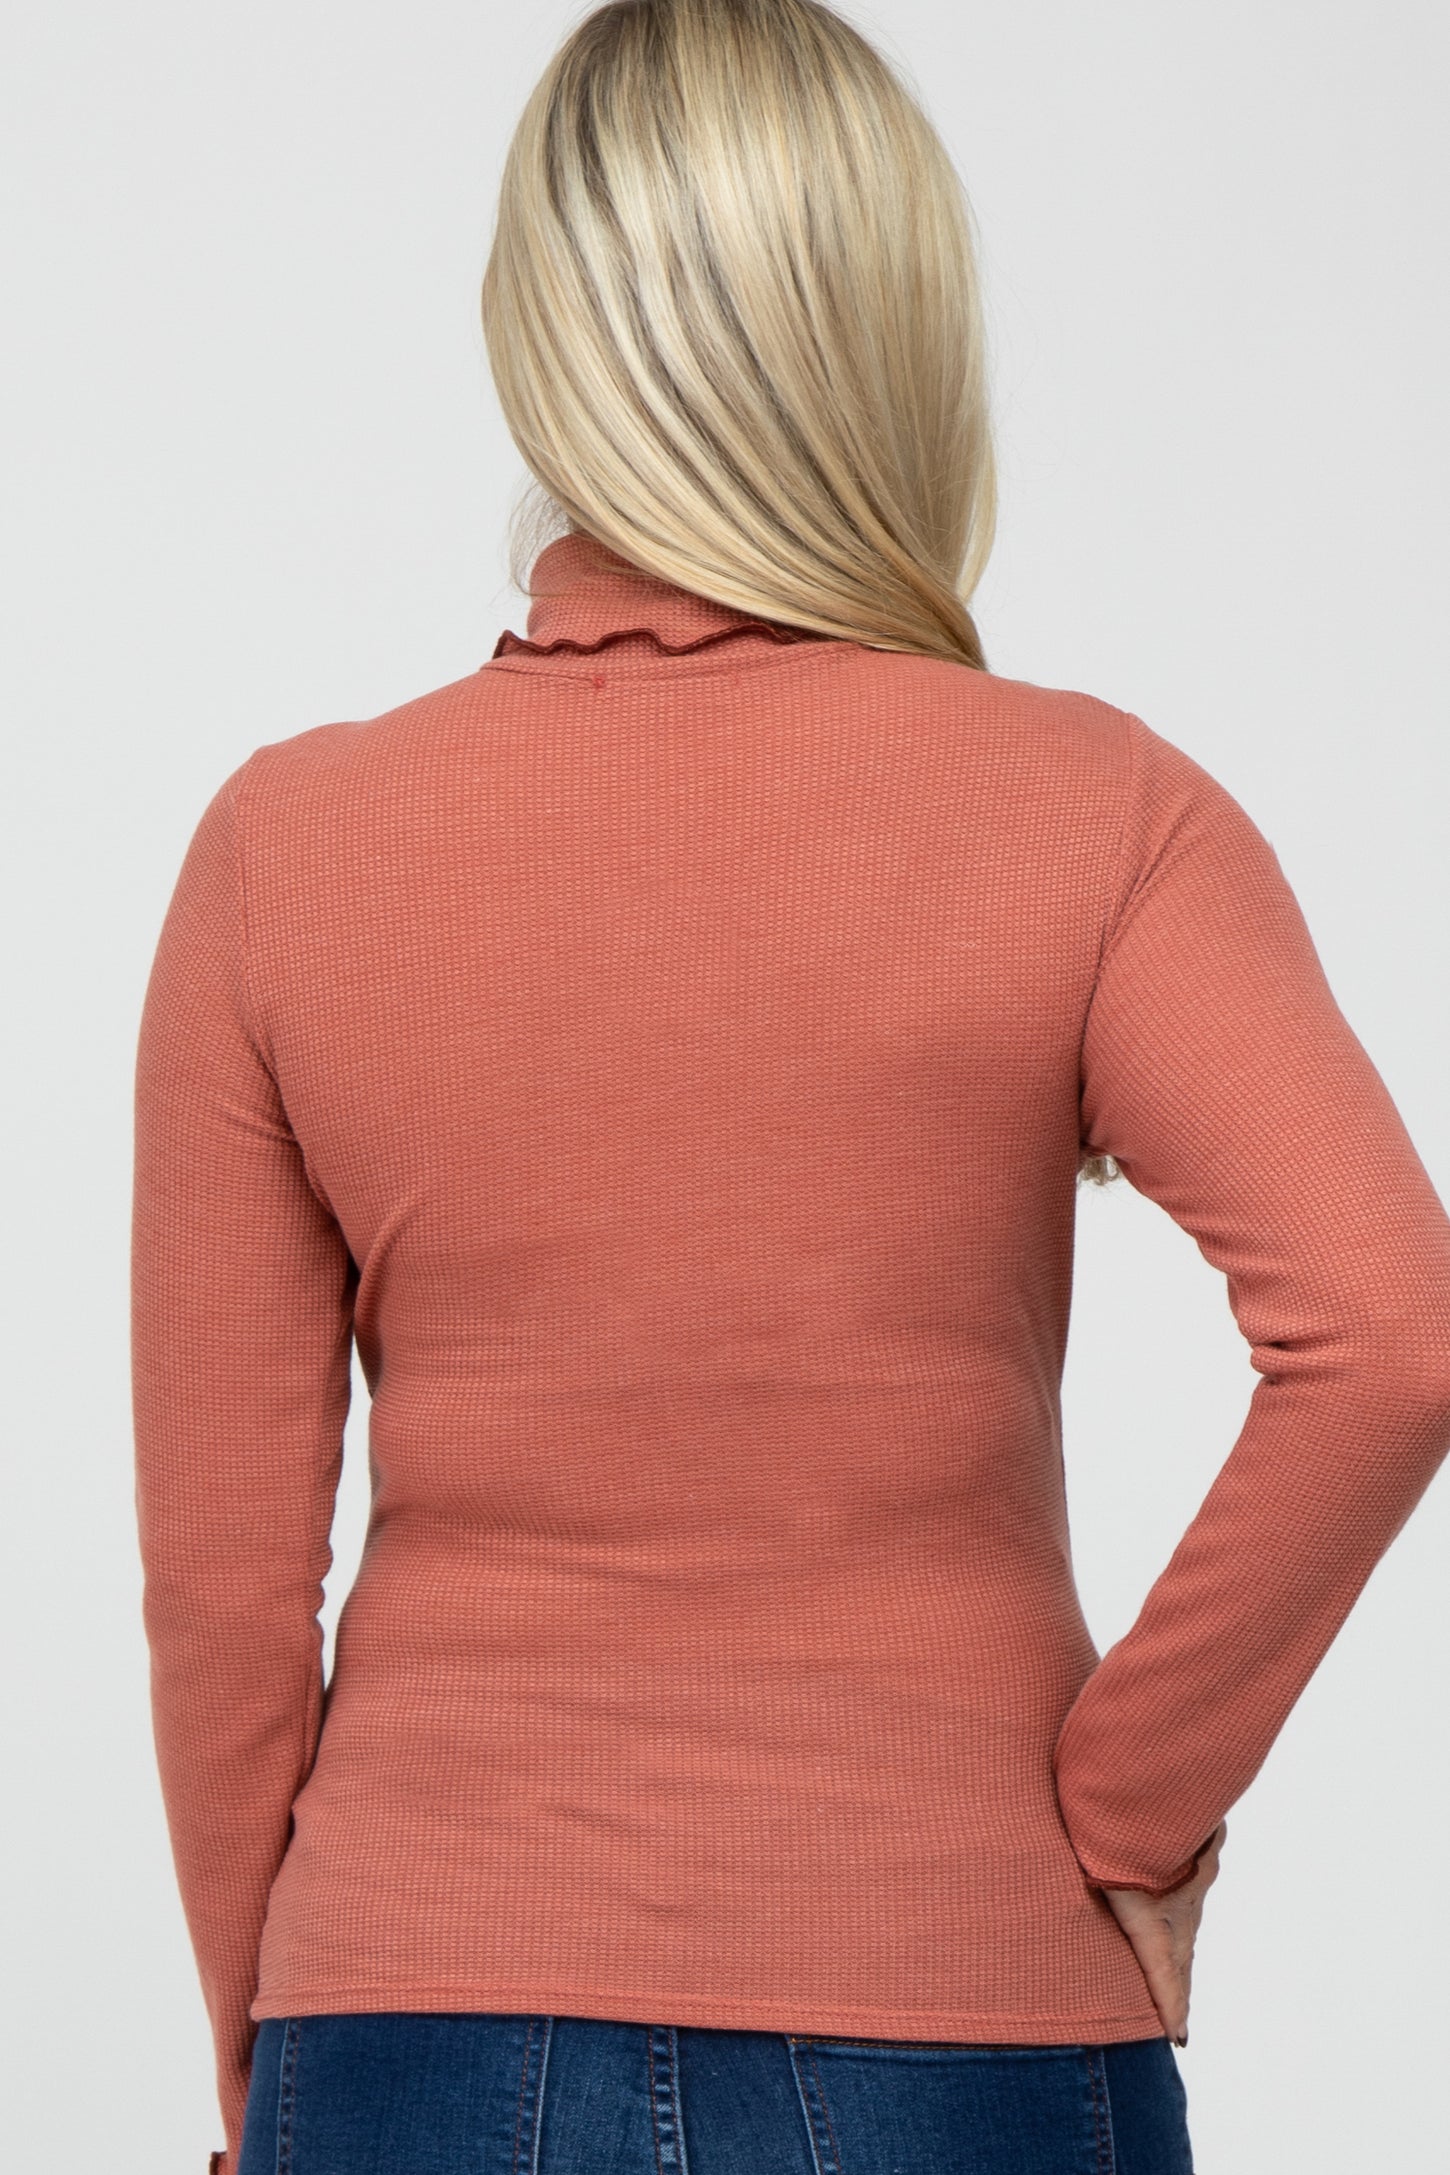 Rust Thermal Knit Turtle Neck Maternity Top